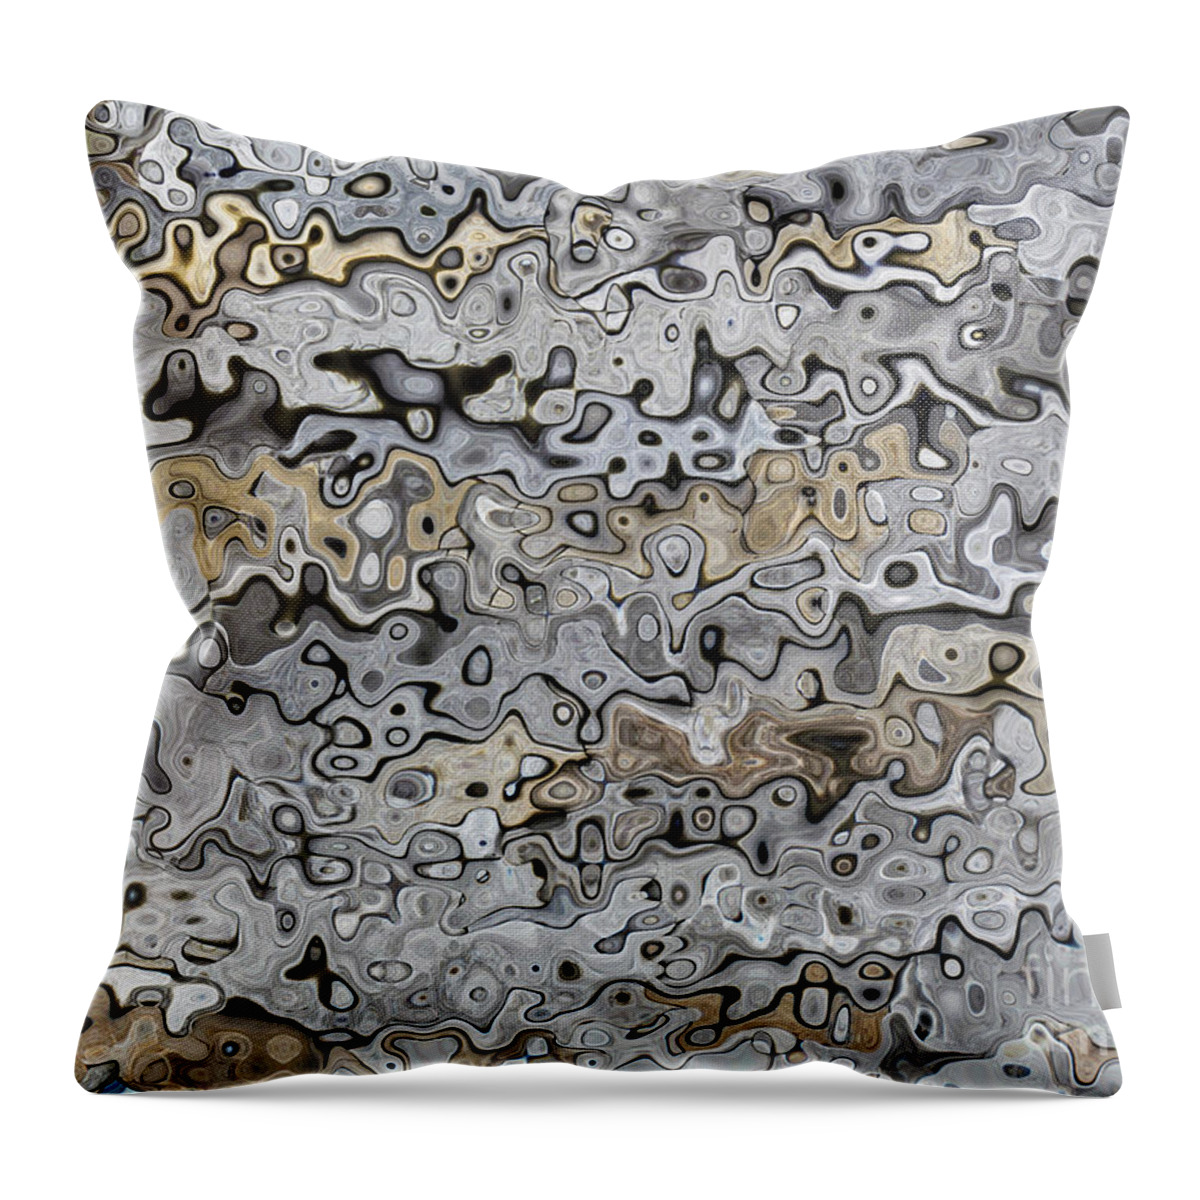 Digital Art Throw Pillow featuring the digital art Gray Abstract Image by Delynn Addams